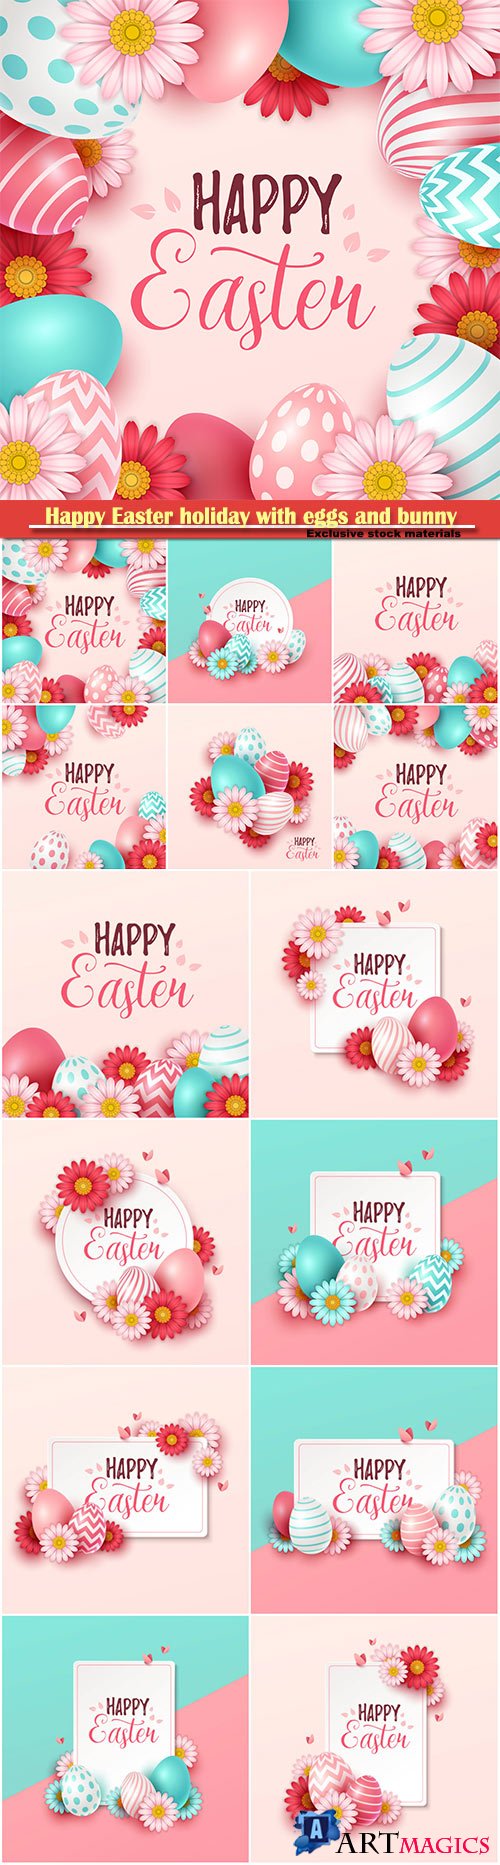 Happy Easter holiday with eggs and bunny, vector illustration # 15